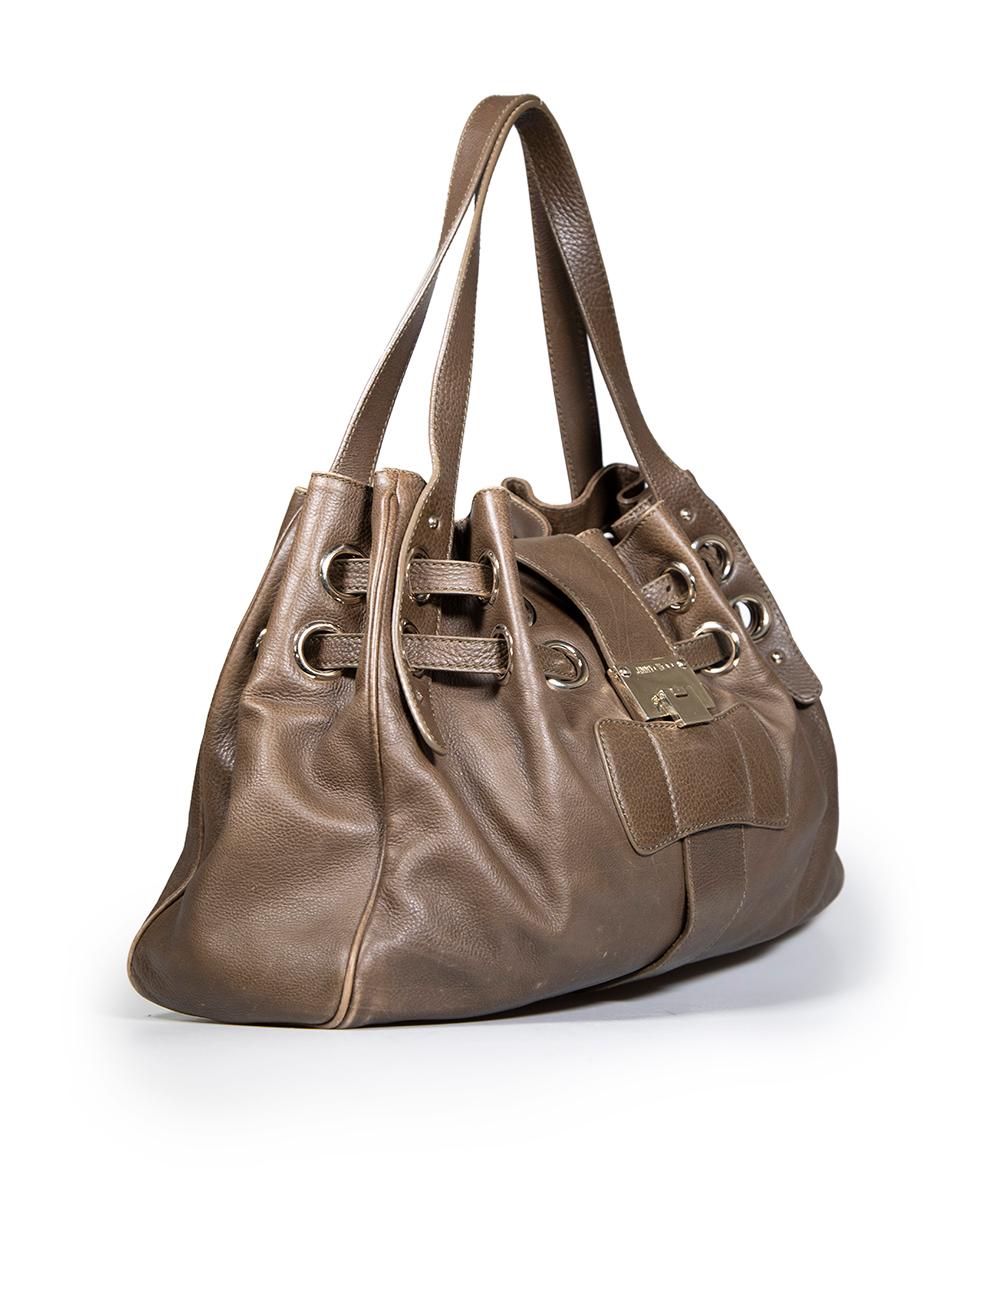 CONDITION is Good. Minor wear to bag is evident. Abrasions to base corners, leather piping around edges and leather handle edges. There are some scratches to front and back on this used Jimmy Choo designer resale item.
 
 
 
 Details
 
 
 Model: